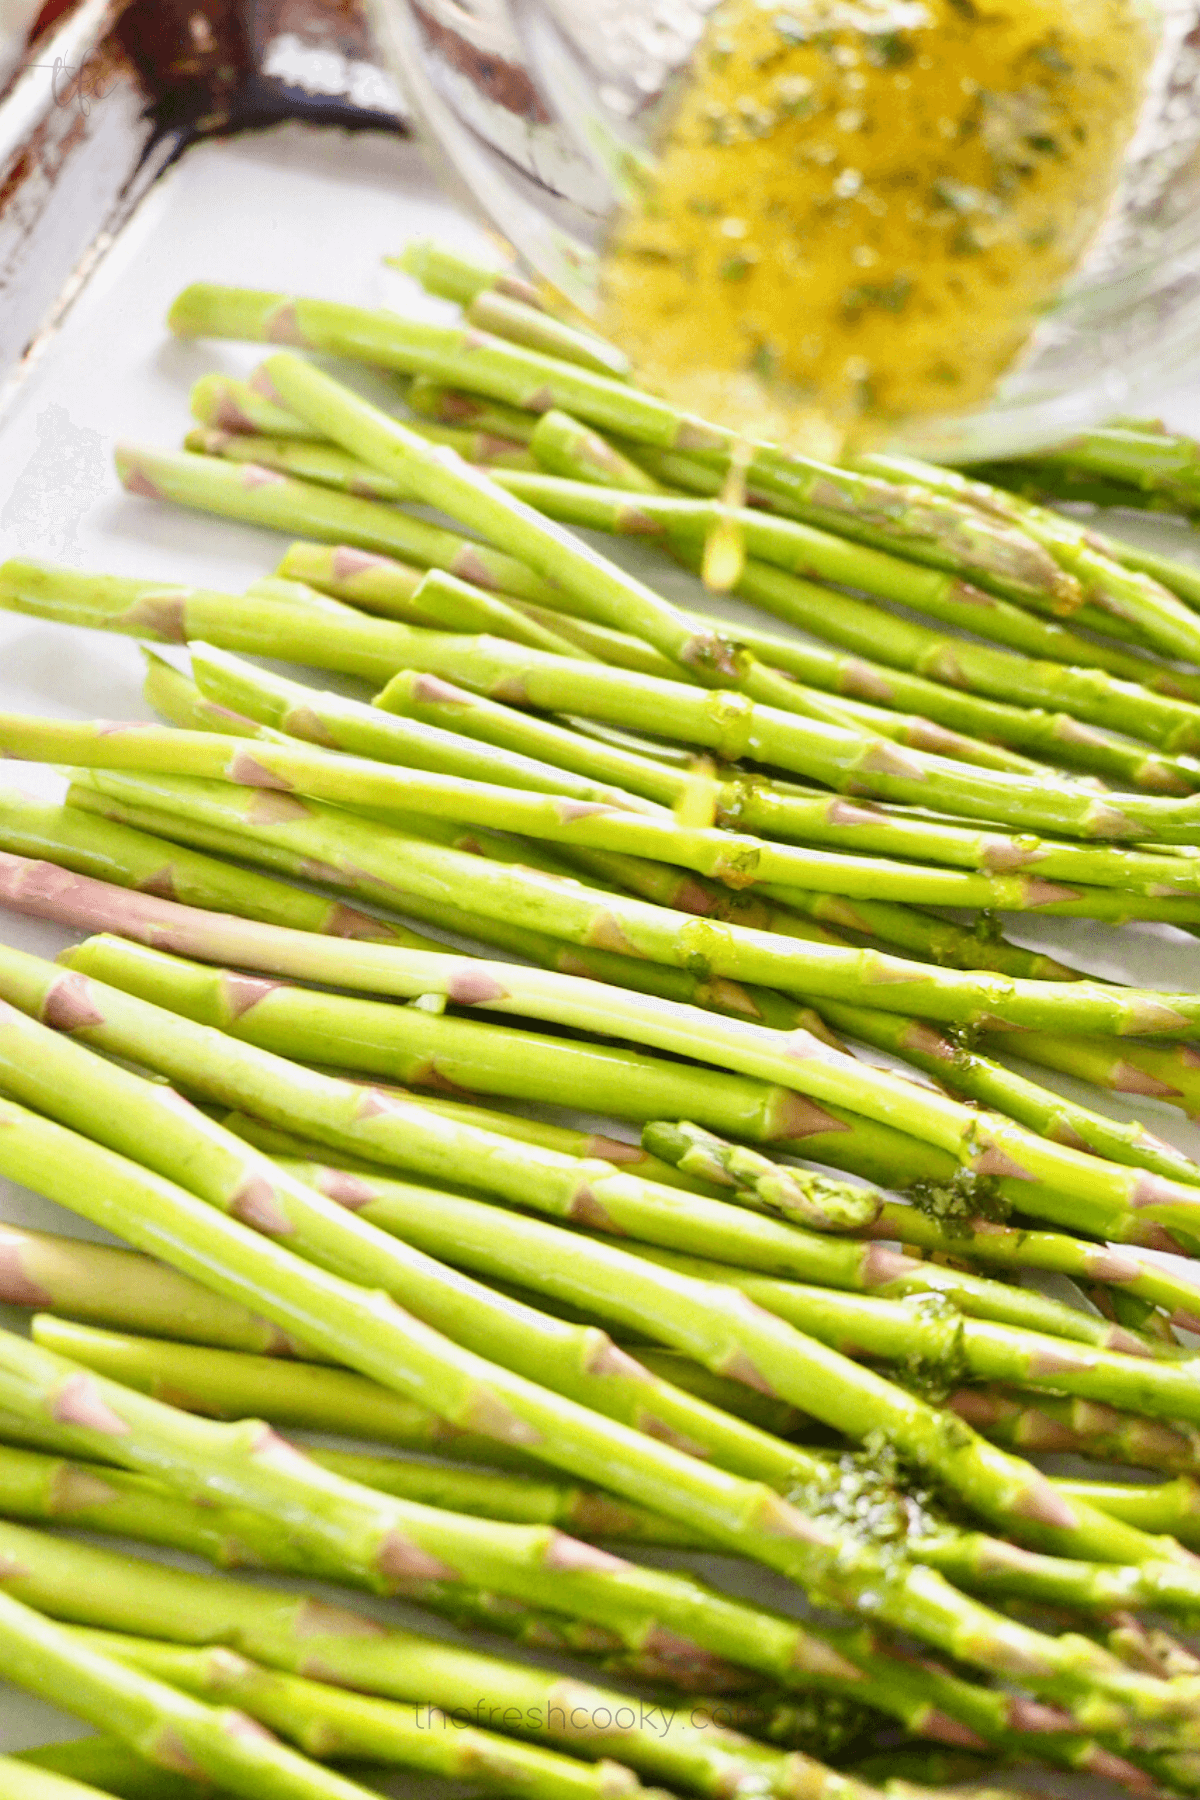 Pouring seasoning oil over the top of washed asparagus for air fryer asparagus recipe.